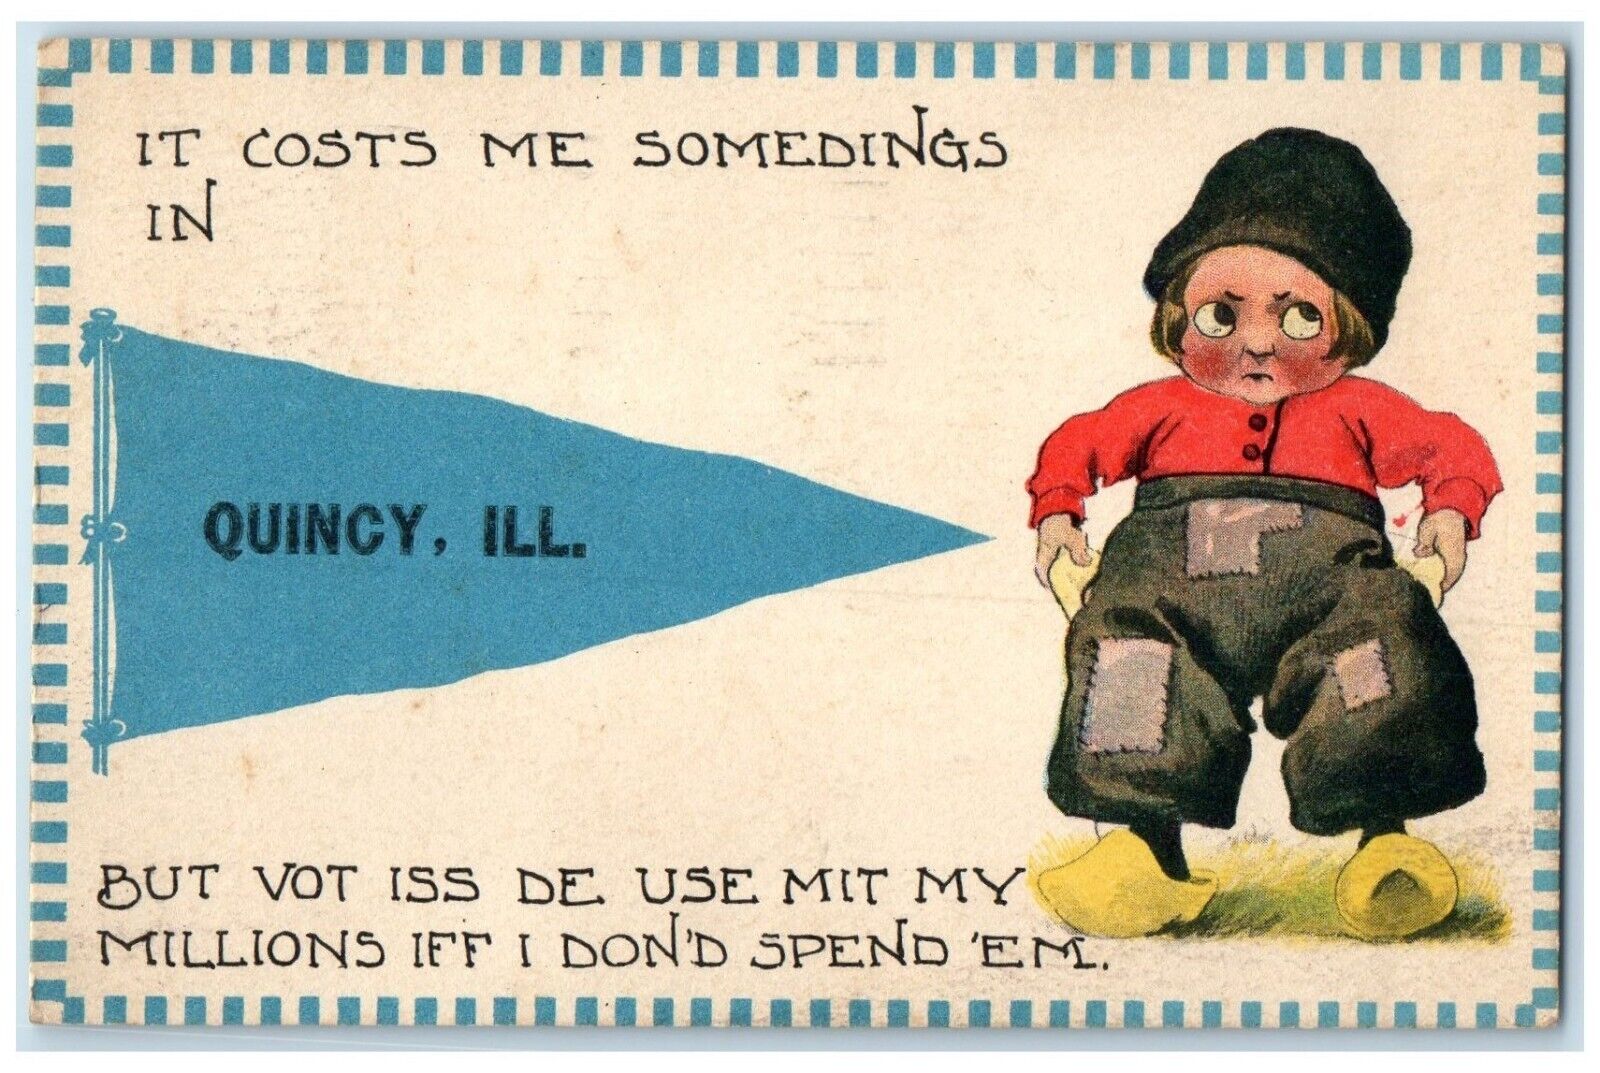 1913 It Costs Me Somedings Quincy Illinois Pennant Kid Vintage Antique Postcard